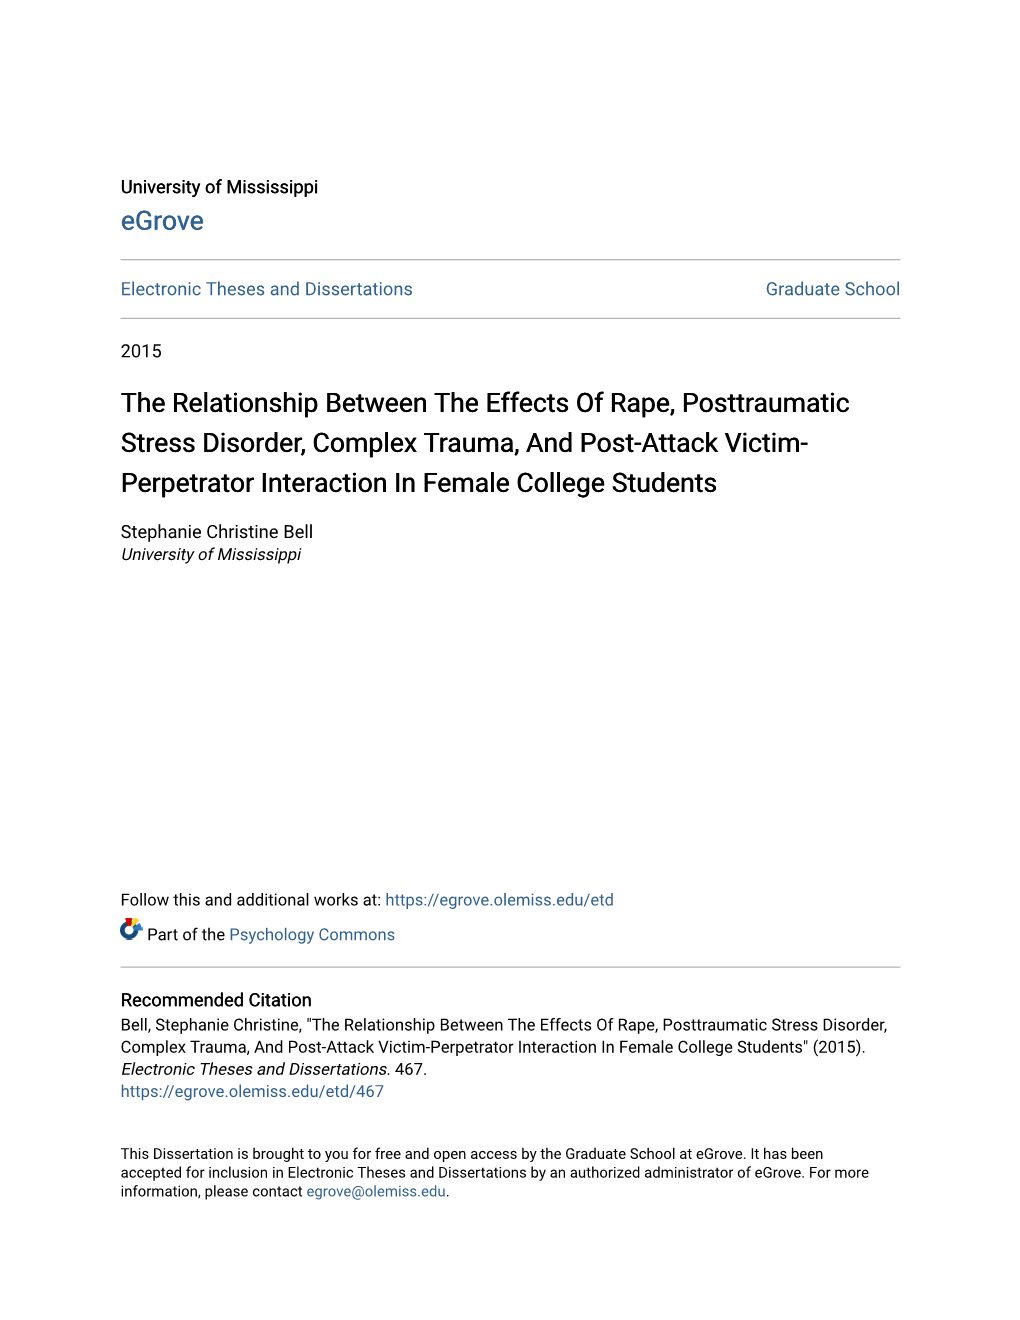 The Relationship Between the Effects of Rape, Posttraumatic Stress